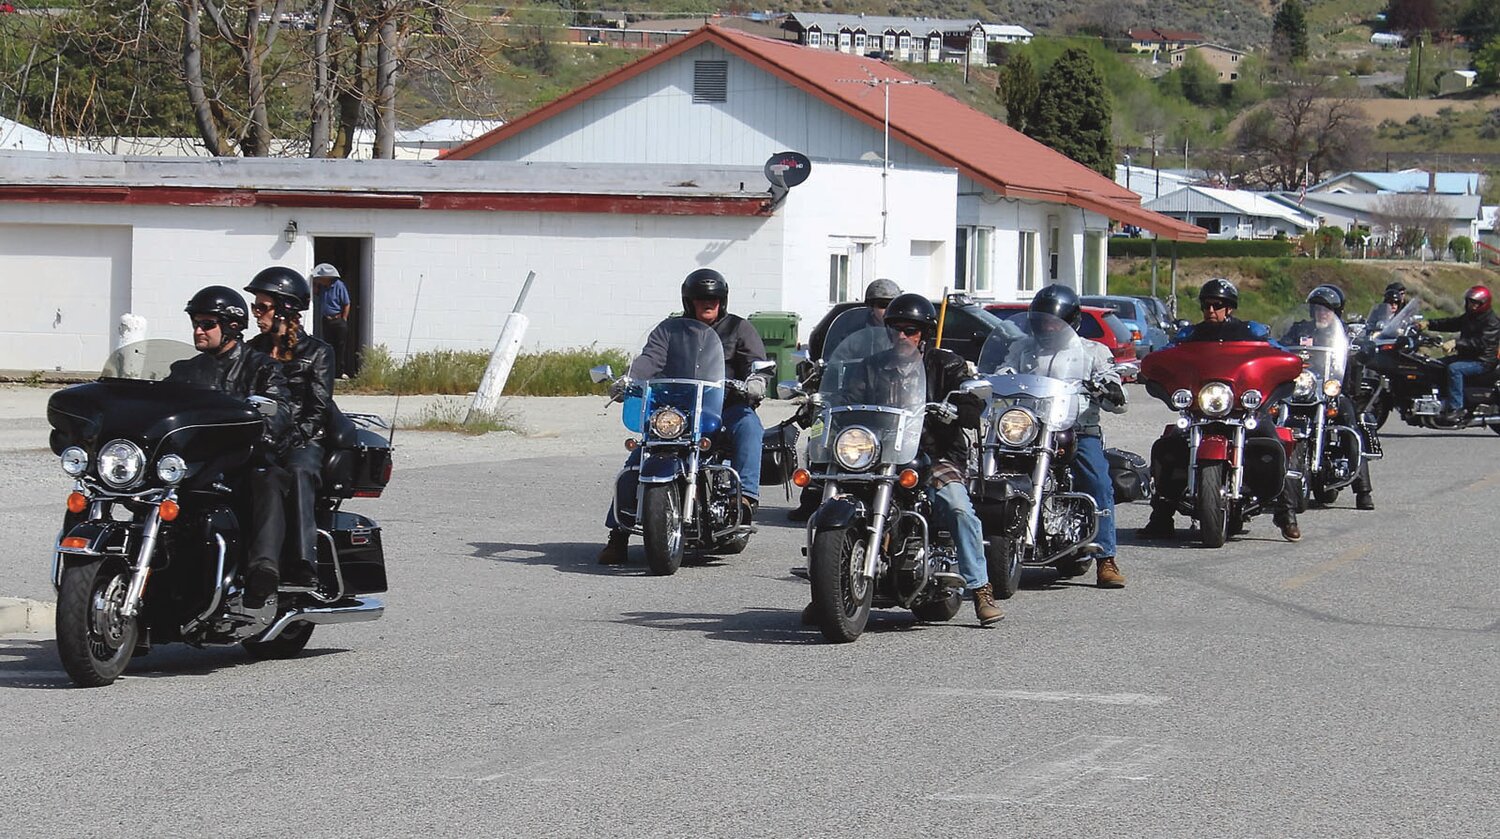 In a ride, similar to this Northwest Honor Flight poker run last April, the Legion Riders and guests collected 62 stuffed animals for first responders during their Teddy Bear Run  Saturday, July 22.